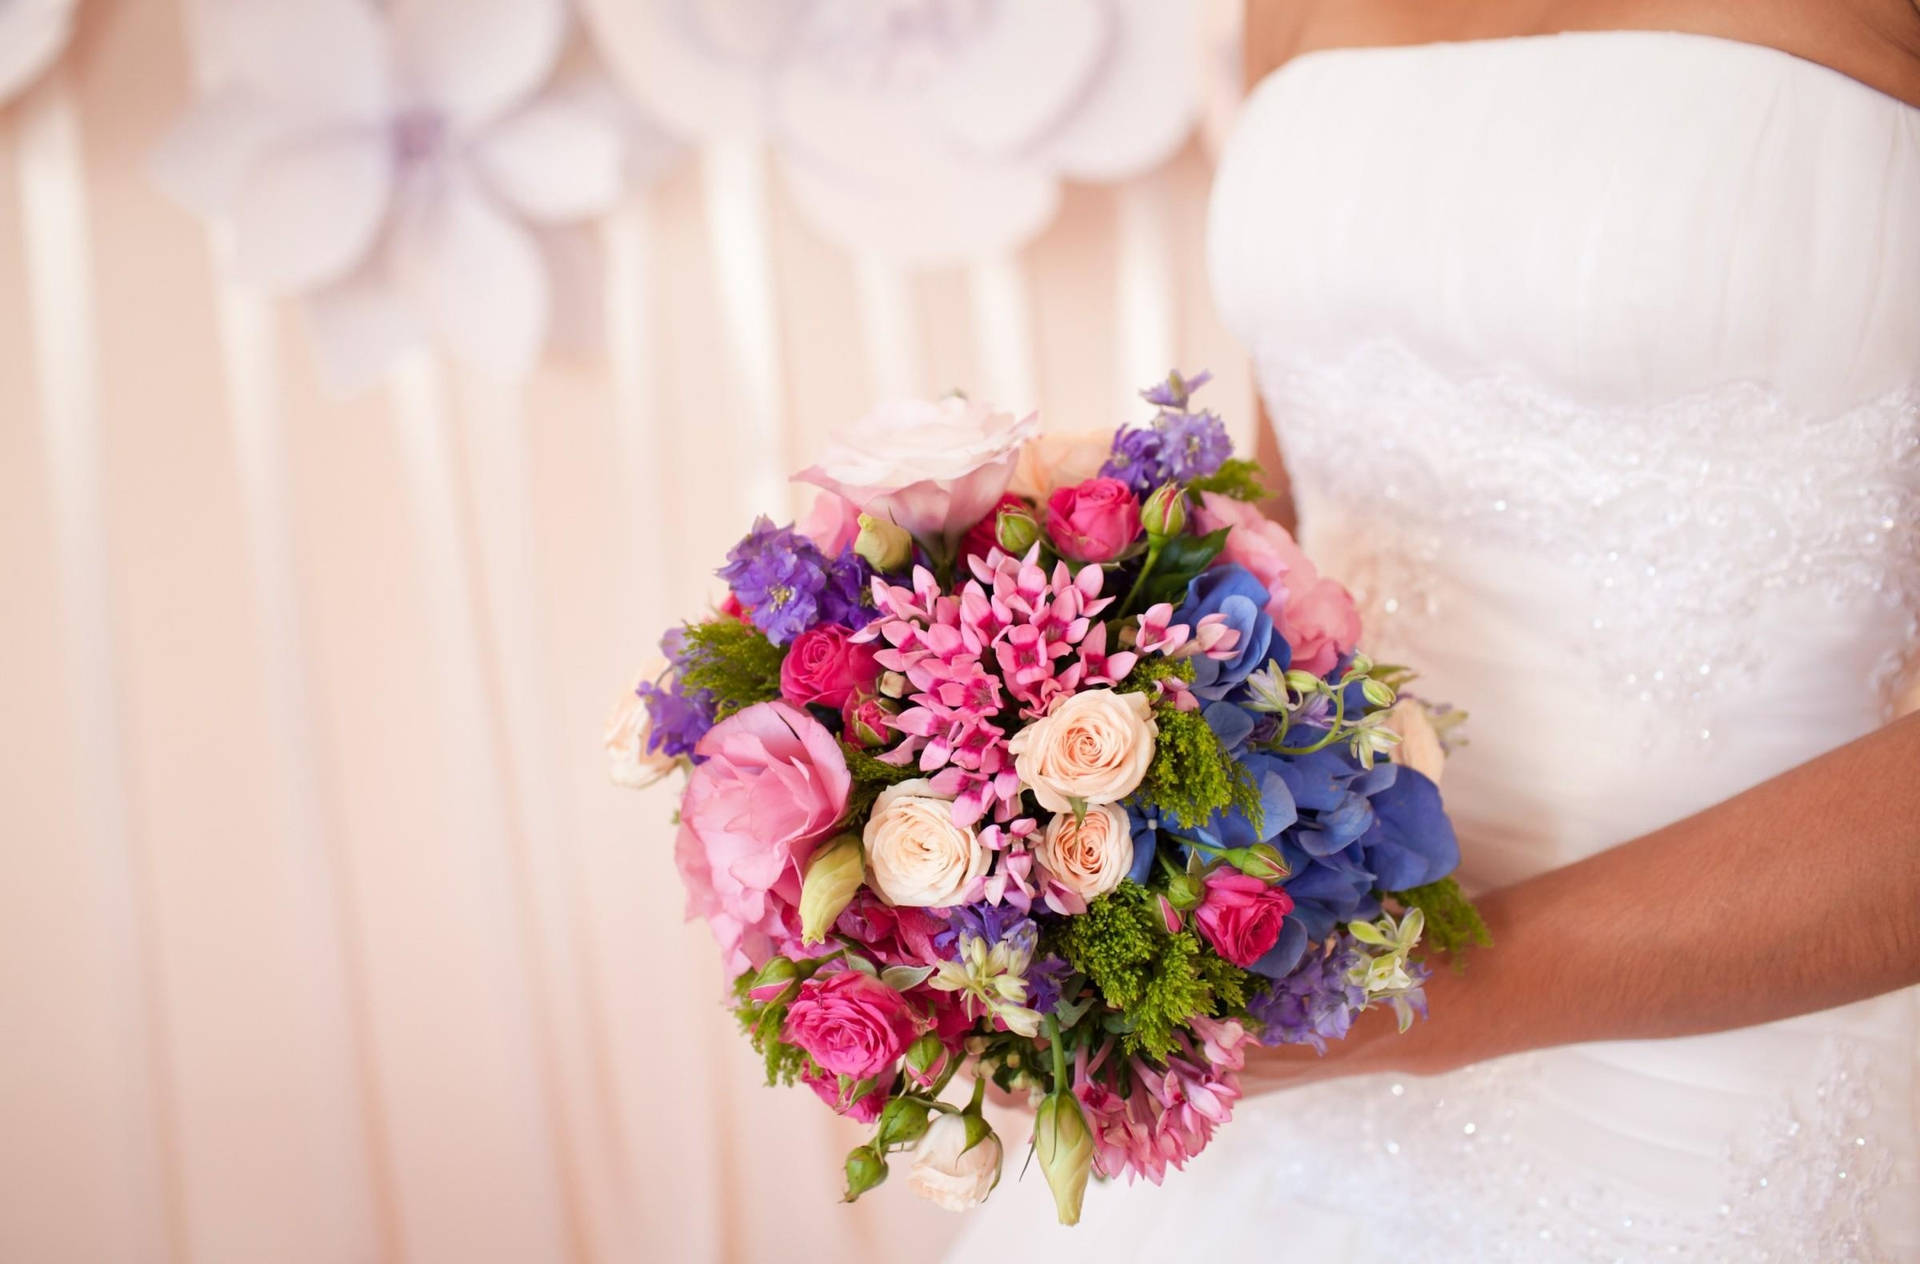 Bride With Colorful Bouquet Of Flowers